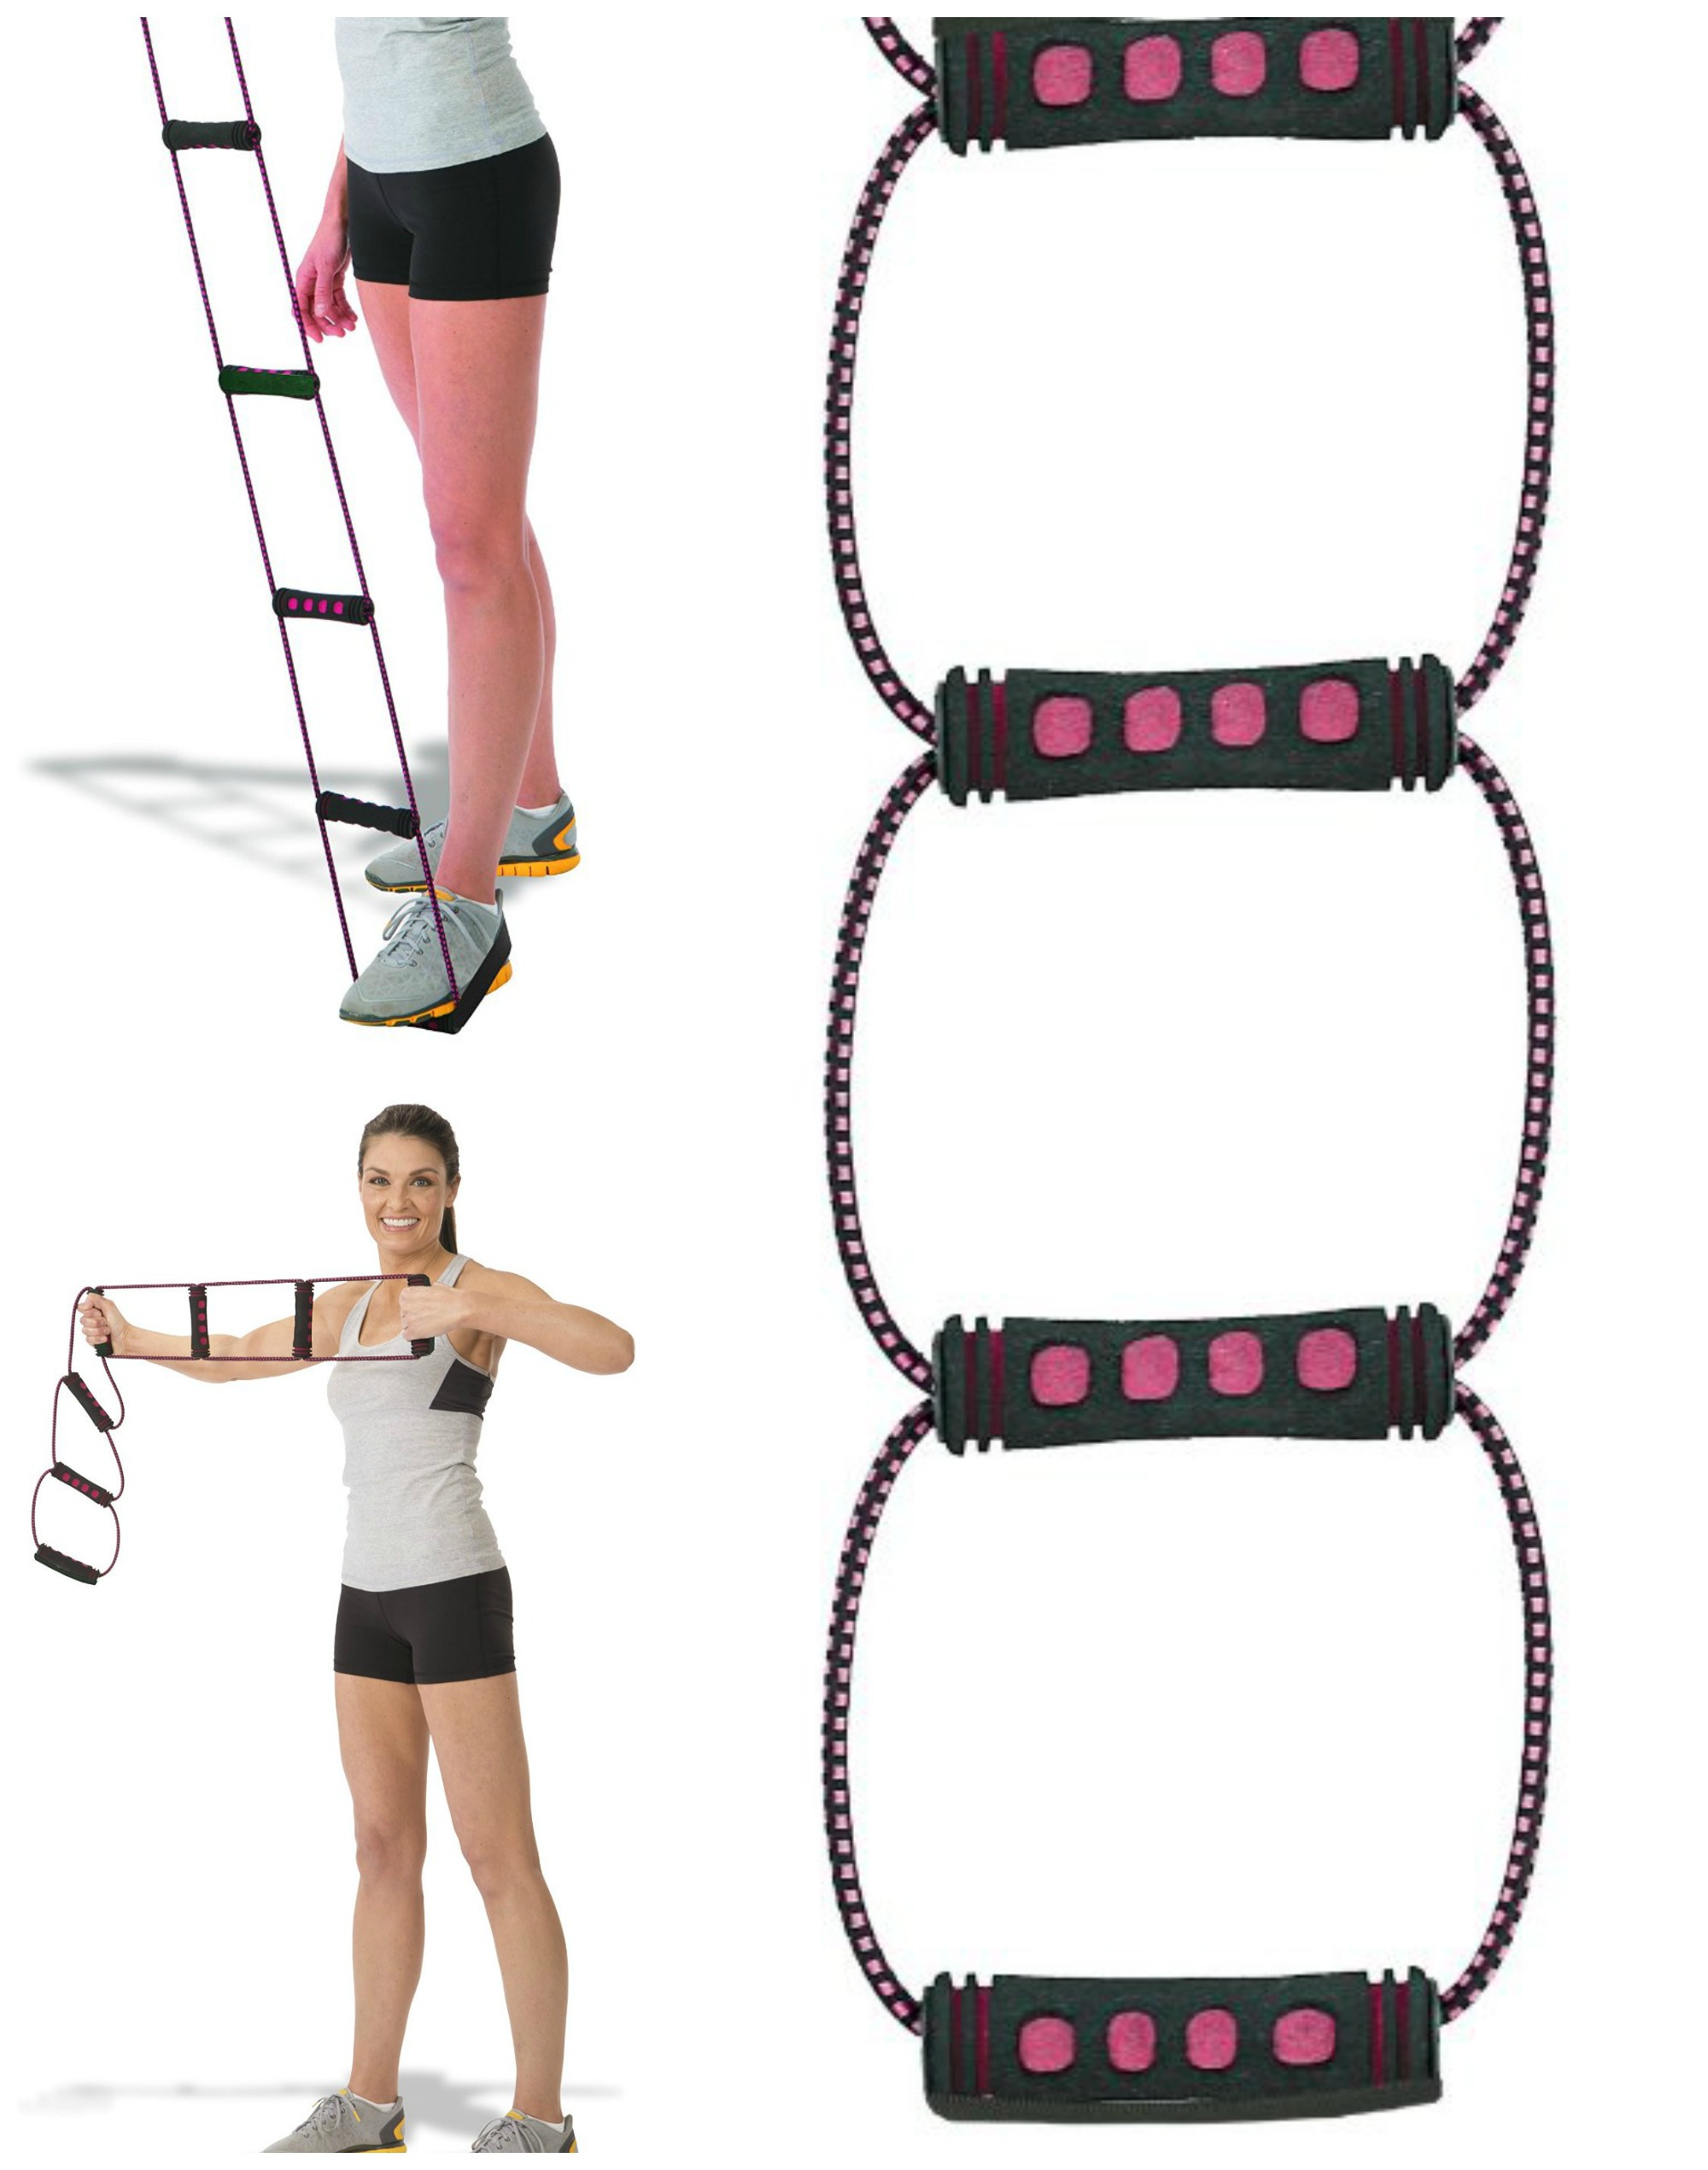 Flex Links- Get up to 20 lbs. of resistance weight with one tool. #ad